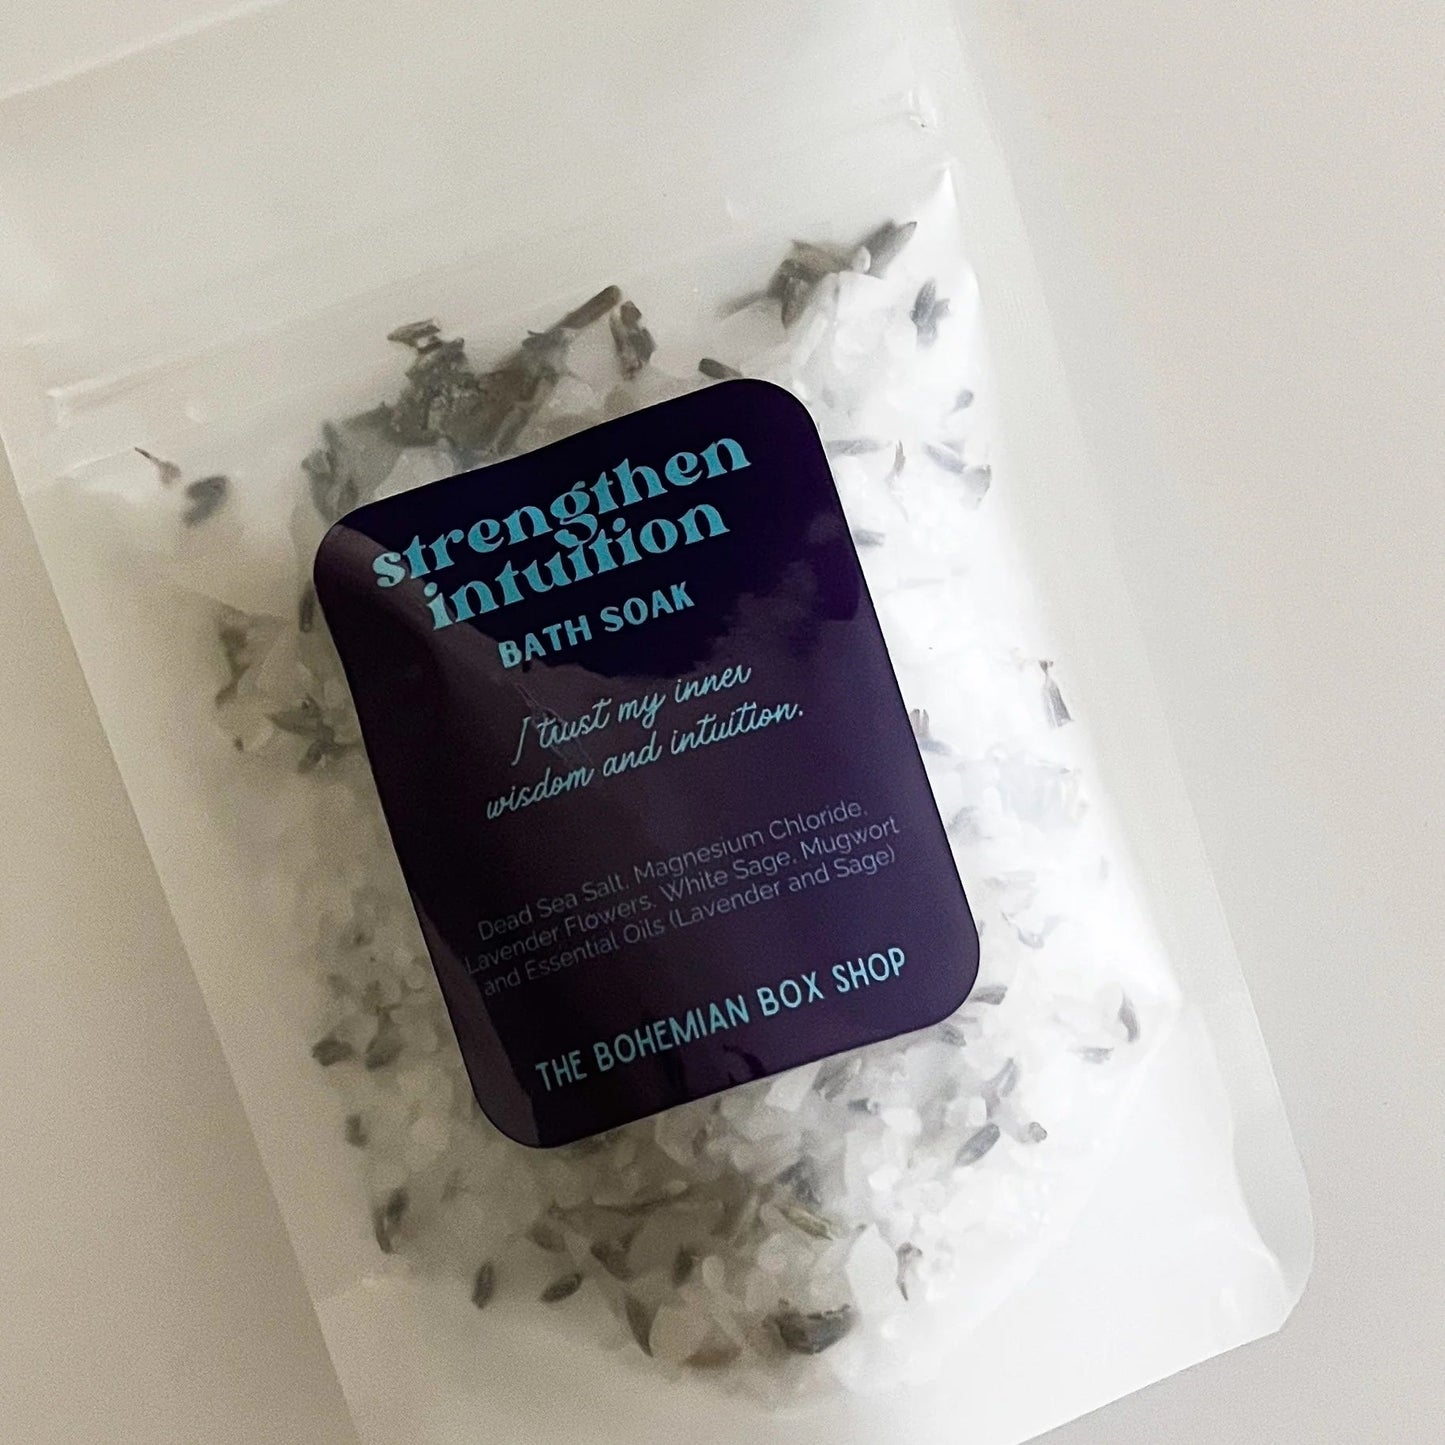 Strengthen intuition bath soak with affirmation 